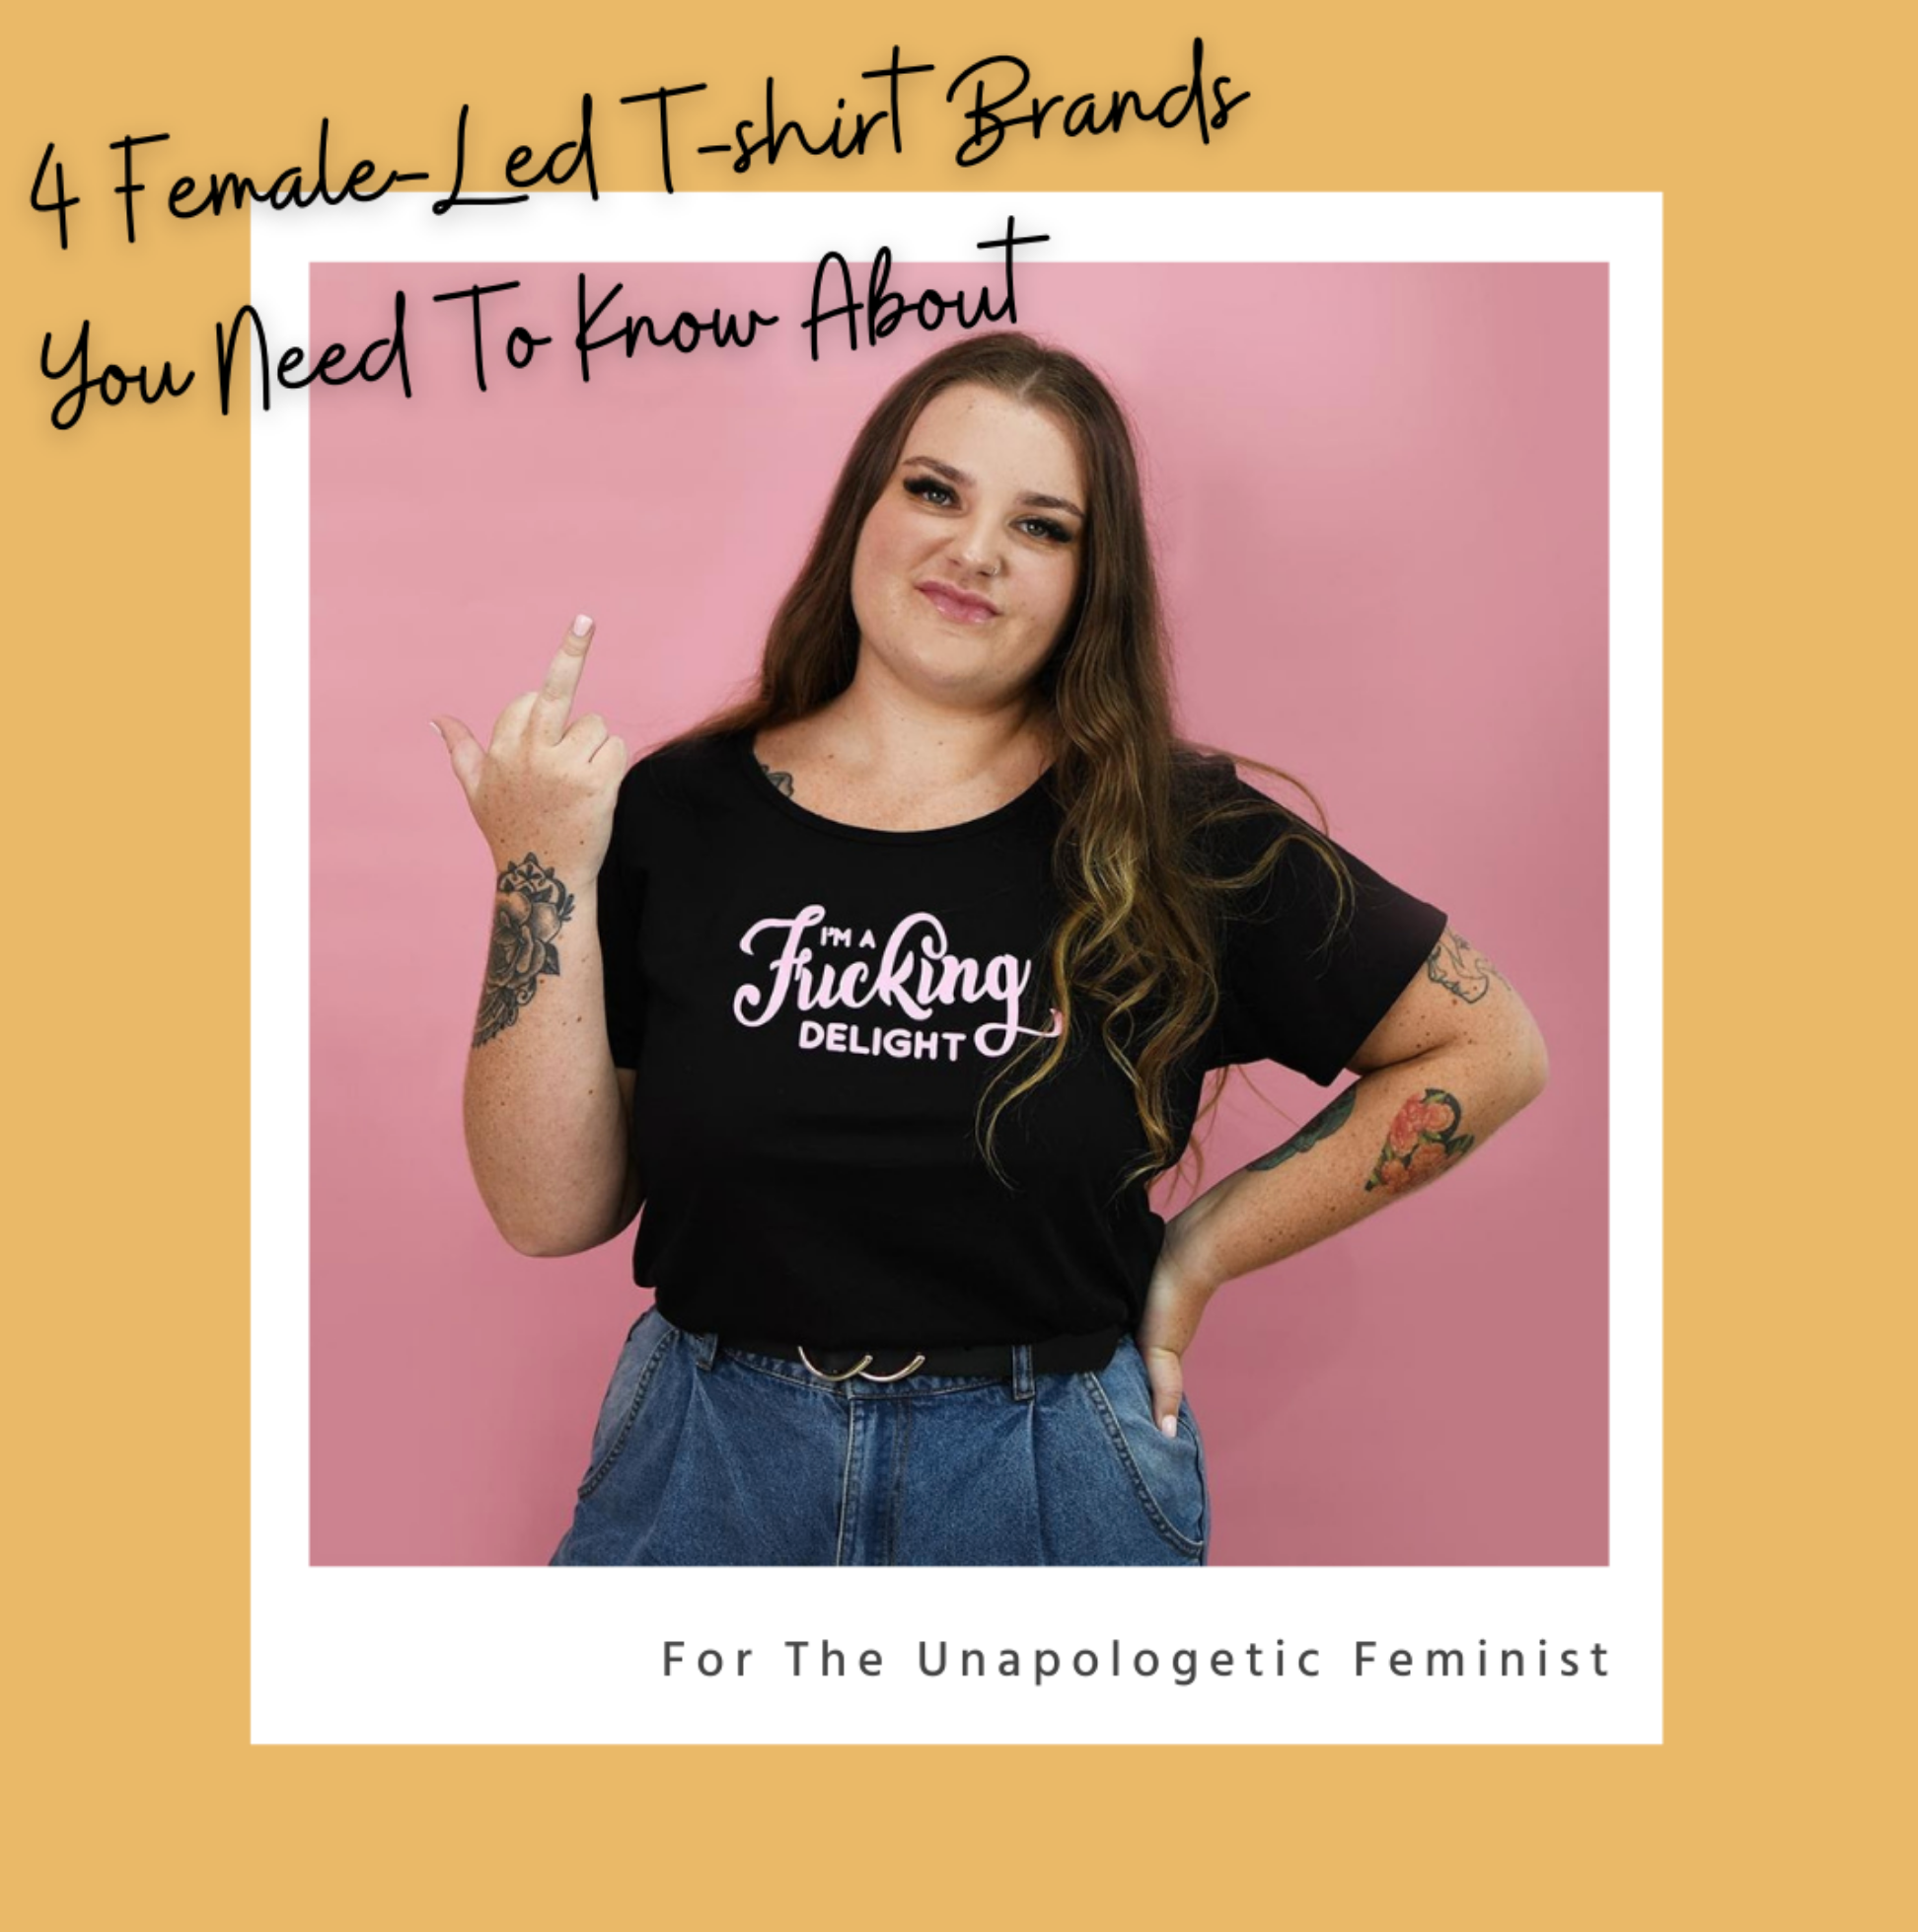 4 Female-Led T-Shirt Brands You Need To Know About – Avarcas Australia